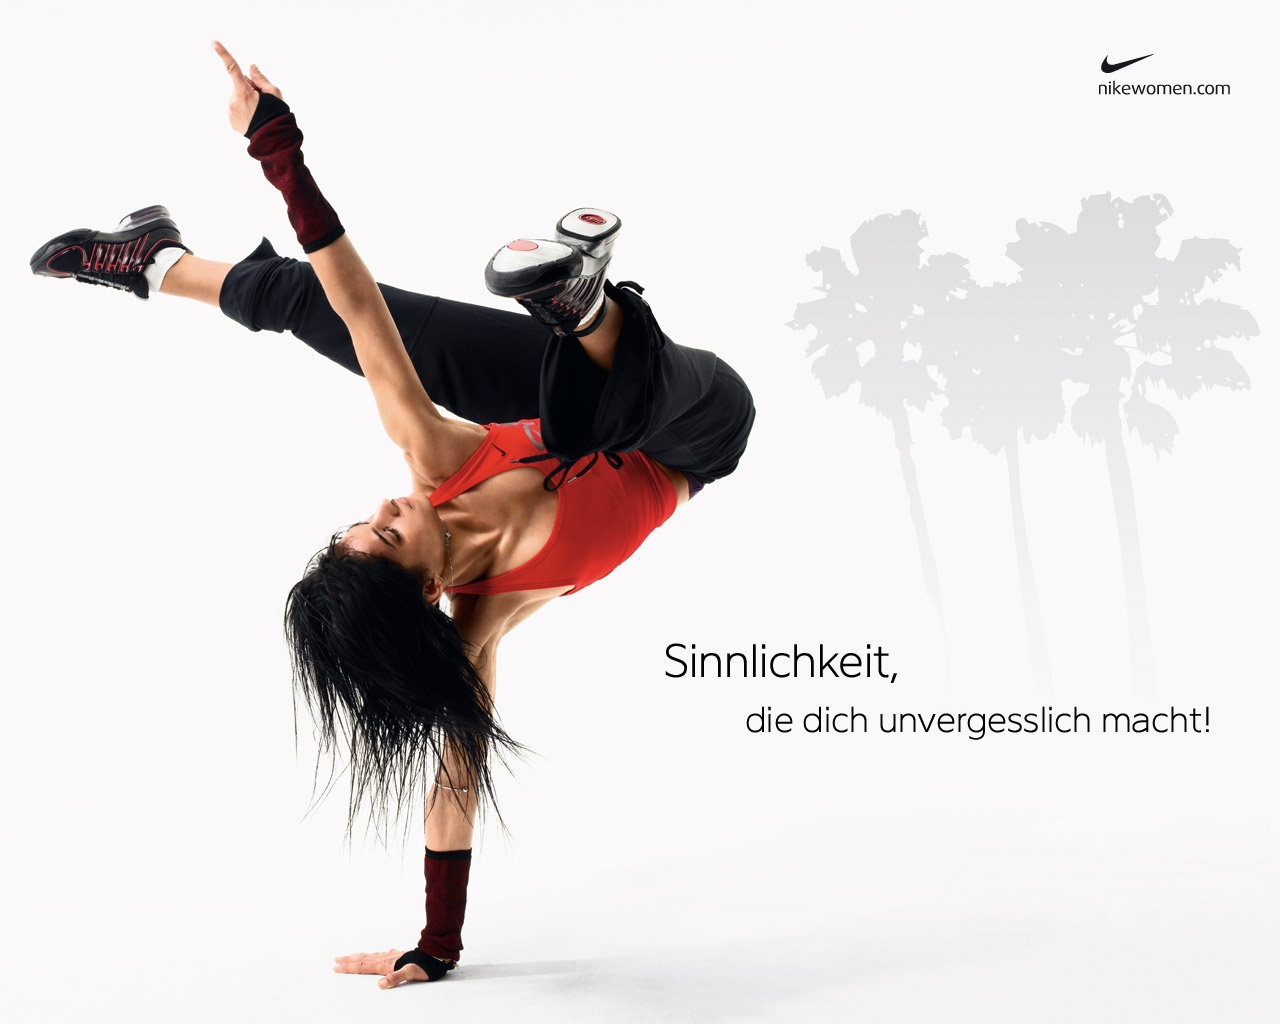 Nike Hd And Wide Wallpapers - Just Do It Nike Women Ad - HD Wallpaper 